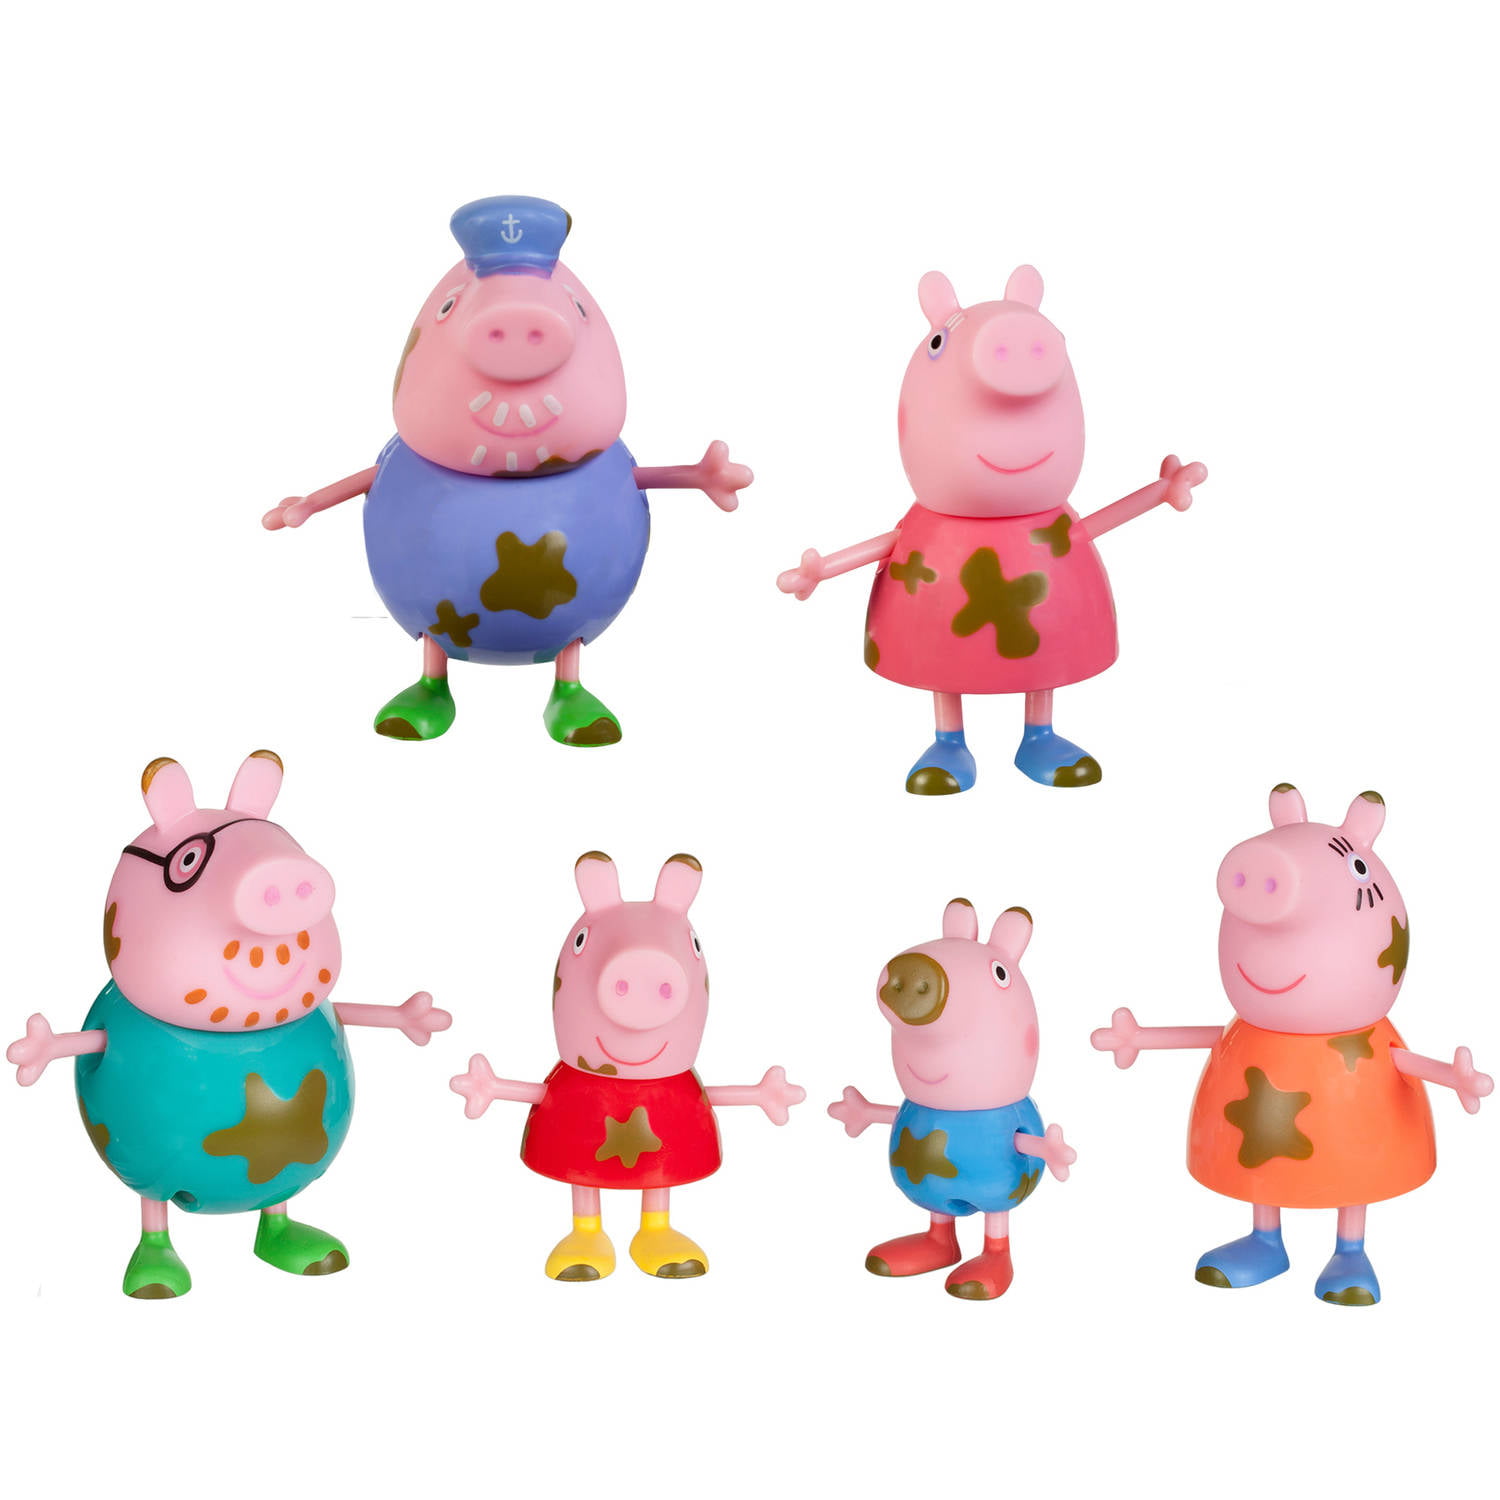 PEPPA PIG FAMILY FIGURES PLAYSET CHILDS KIDS TOY NEW PEPPER PIG 